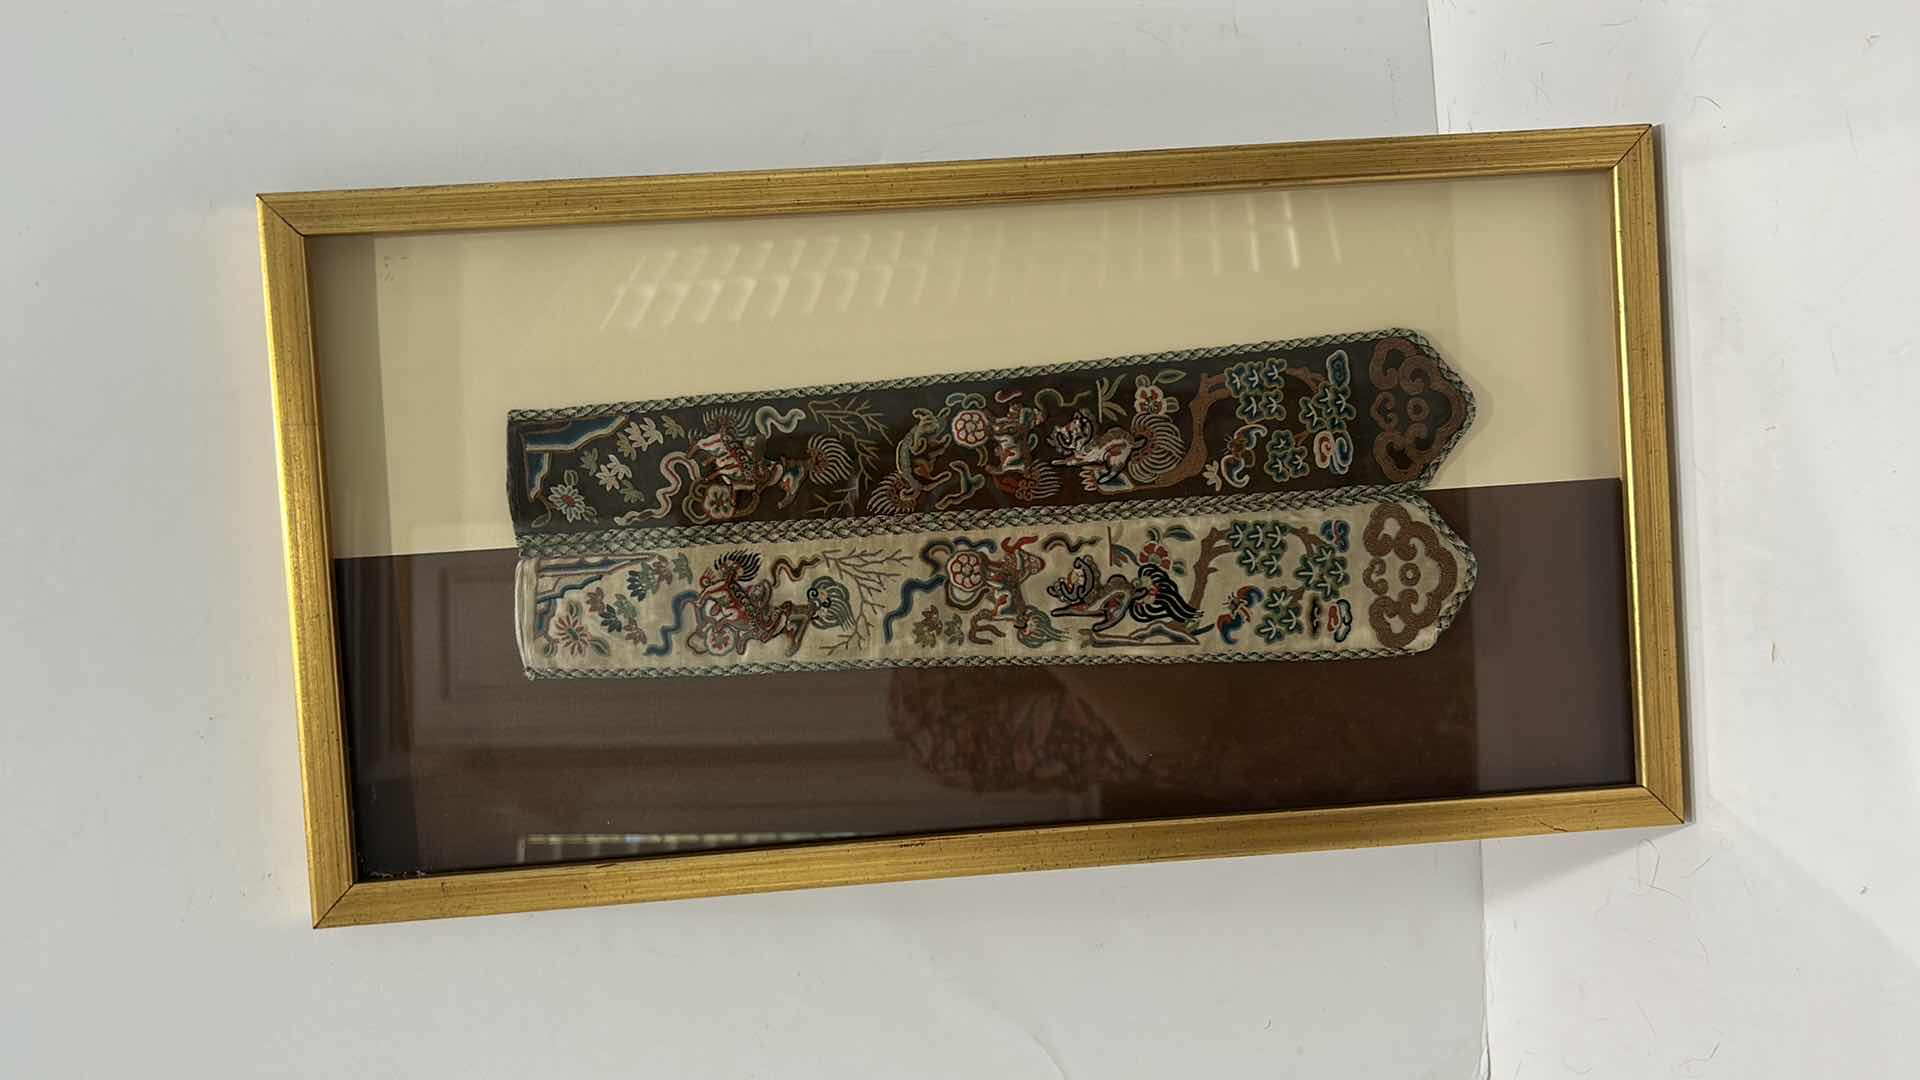 Photo 3 of ANTIQUE CHINESE TEXTILE FABRIC, SILK WITH SILK THREAD HAND EMBROIDERY ARTWORK FRAMED   9” x 17